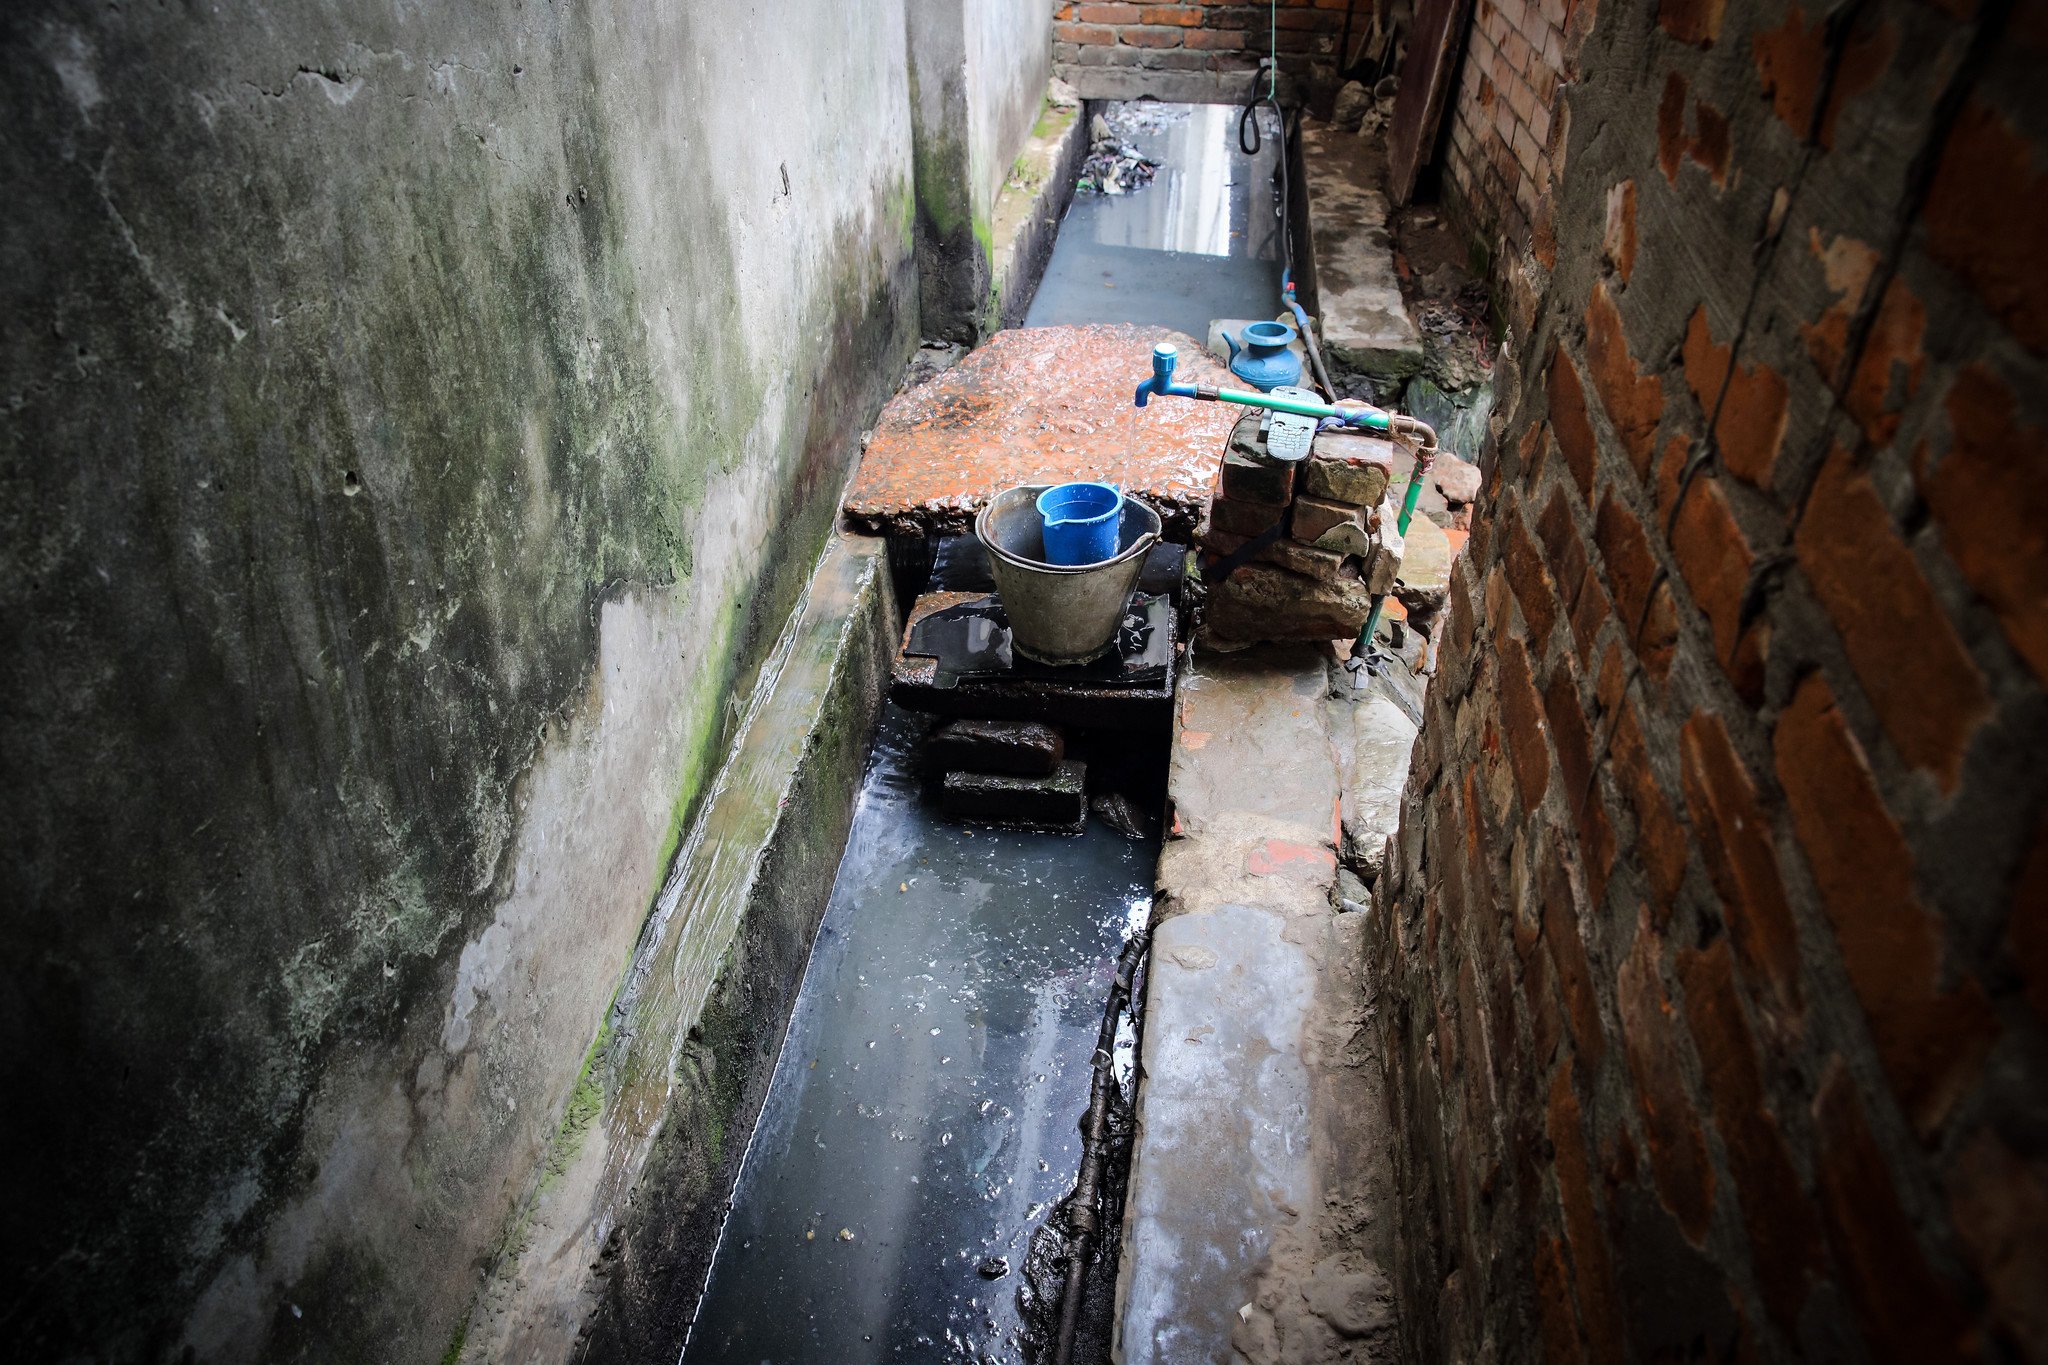 A channel of filthy waste runs through the narrow yard where they bathe, prepare meals and wash and dry their clothes. In rainy season this overflows, flooding their homes. (Photo: GMB Akash)